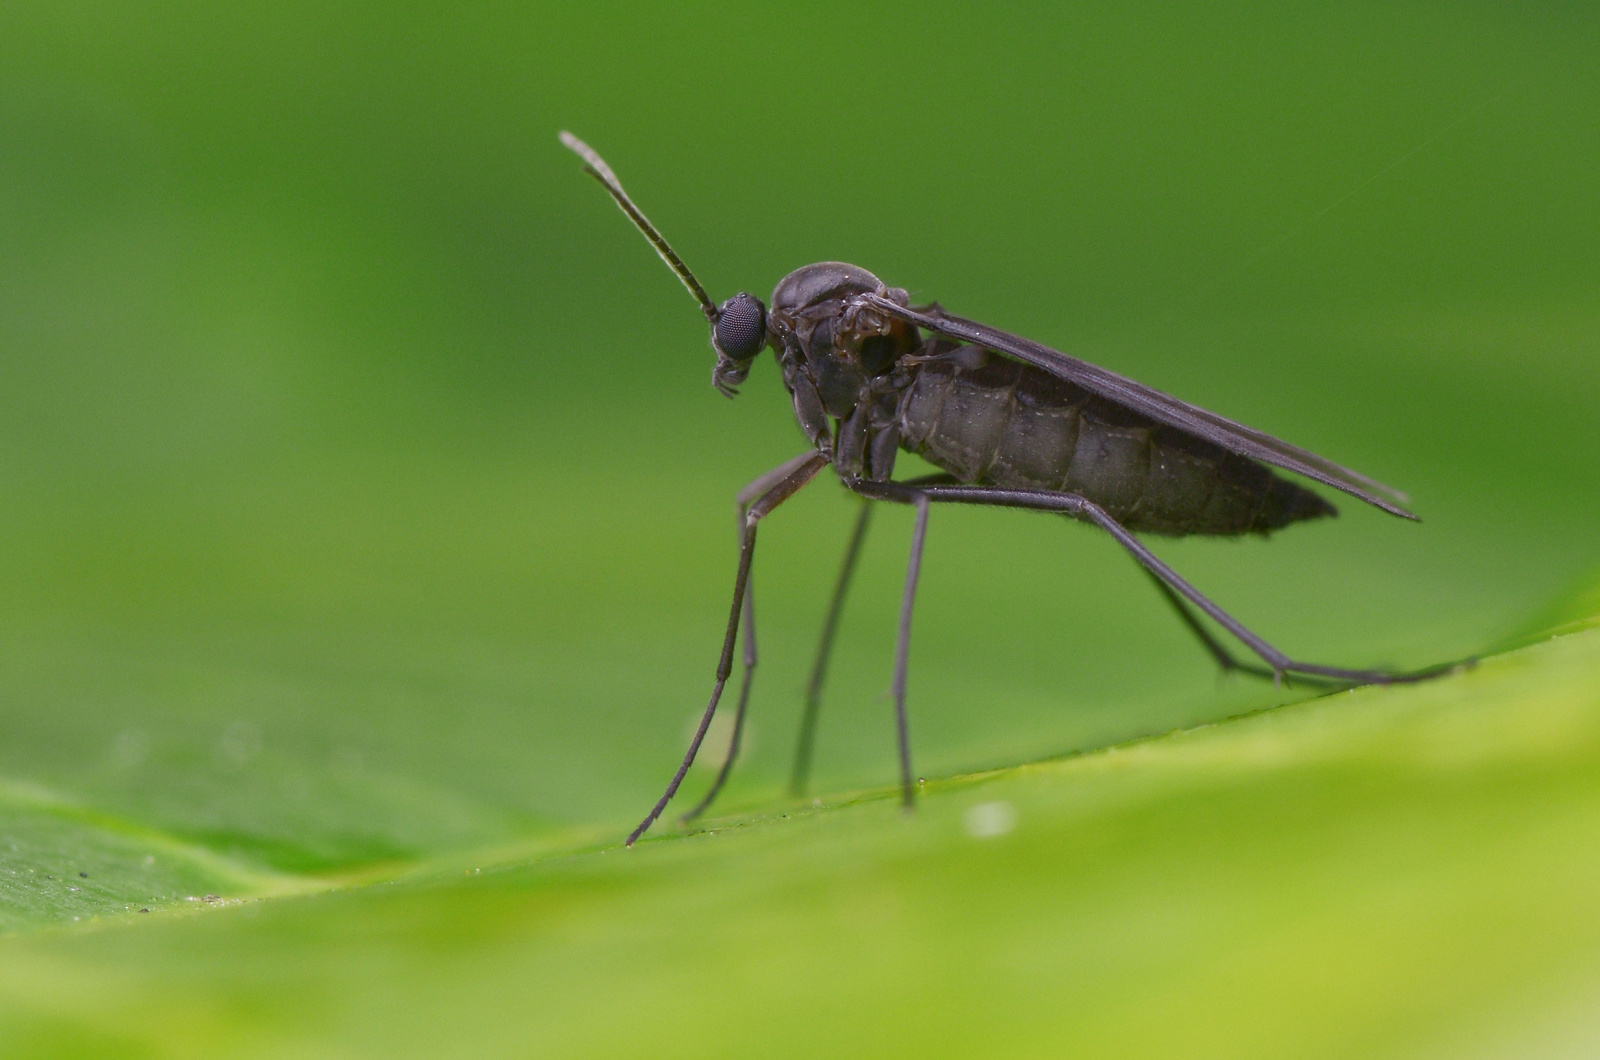 Gnat on a green plant